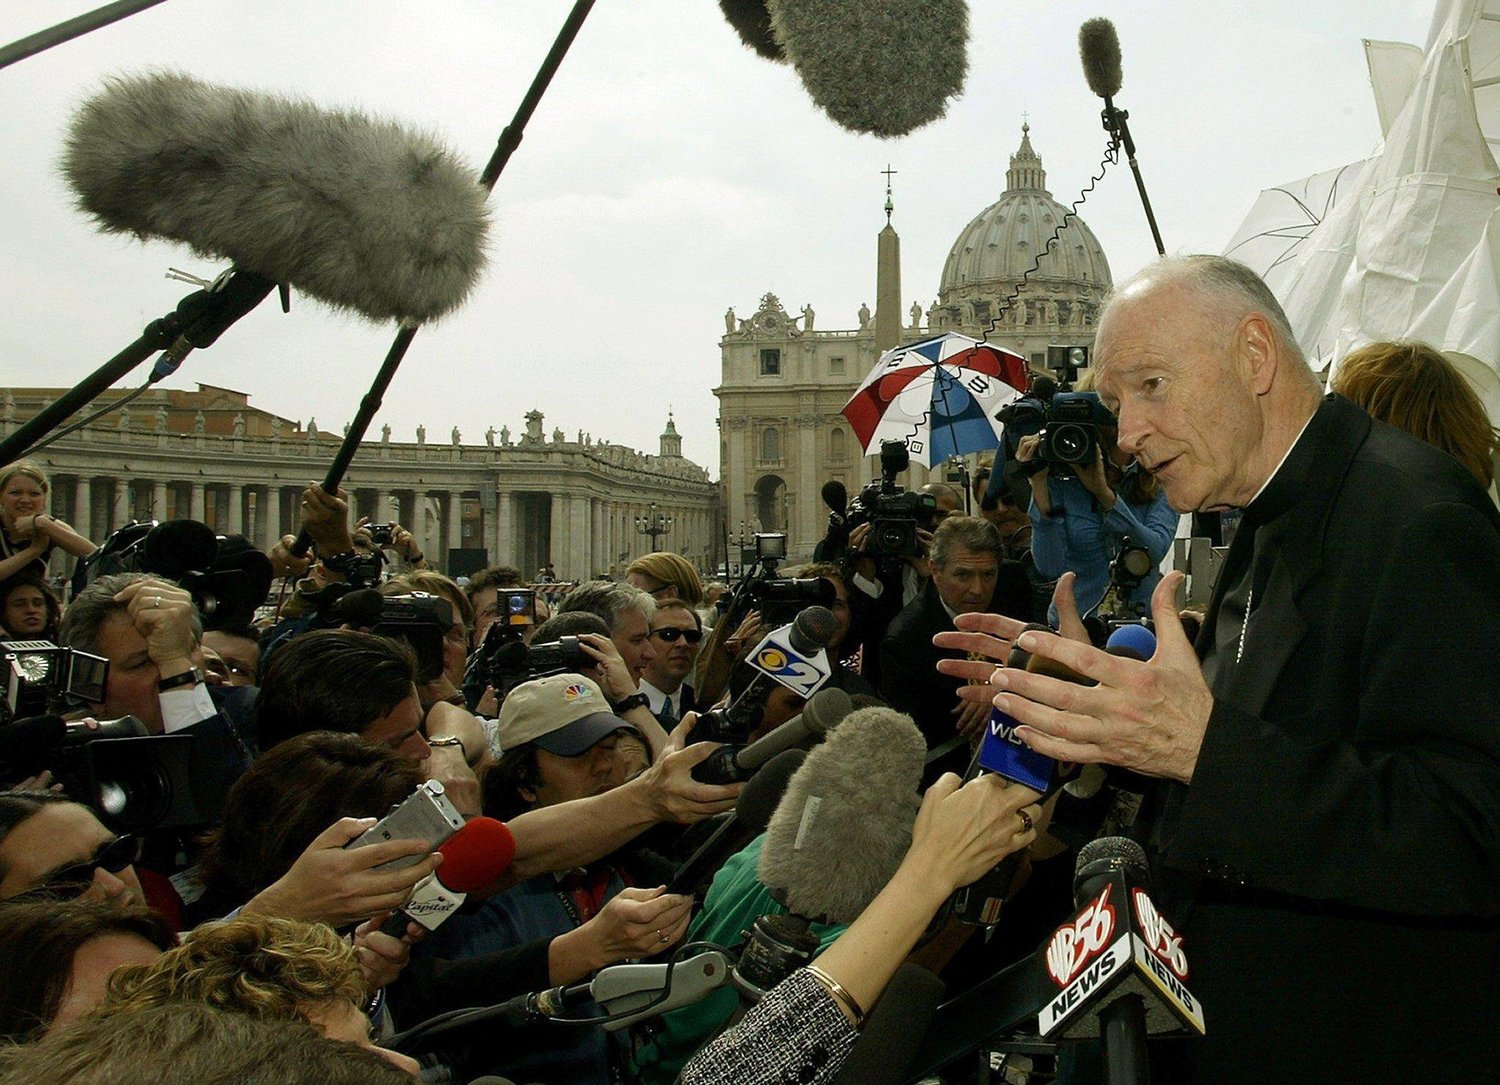 Then-Cardinal Theodore E. McCarrick of Washington faces the press in the shadow of St. Peter’s Basilica at the Vatican April 24, 2002. U.S cardinals met for a summit with Pope John Paul II at the Vatican April 23-24, 2002, as the sex abuse crisis unfolded in the United States. Cardinal McCarrick was a key spokesman for the bishops during the summit.